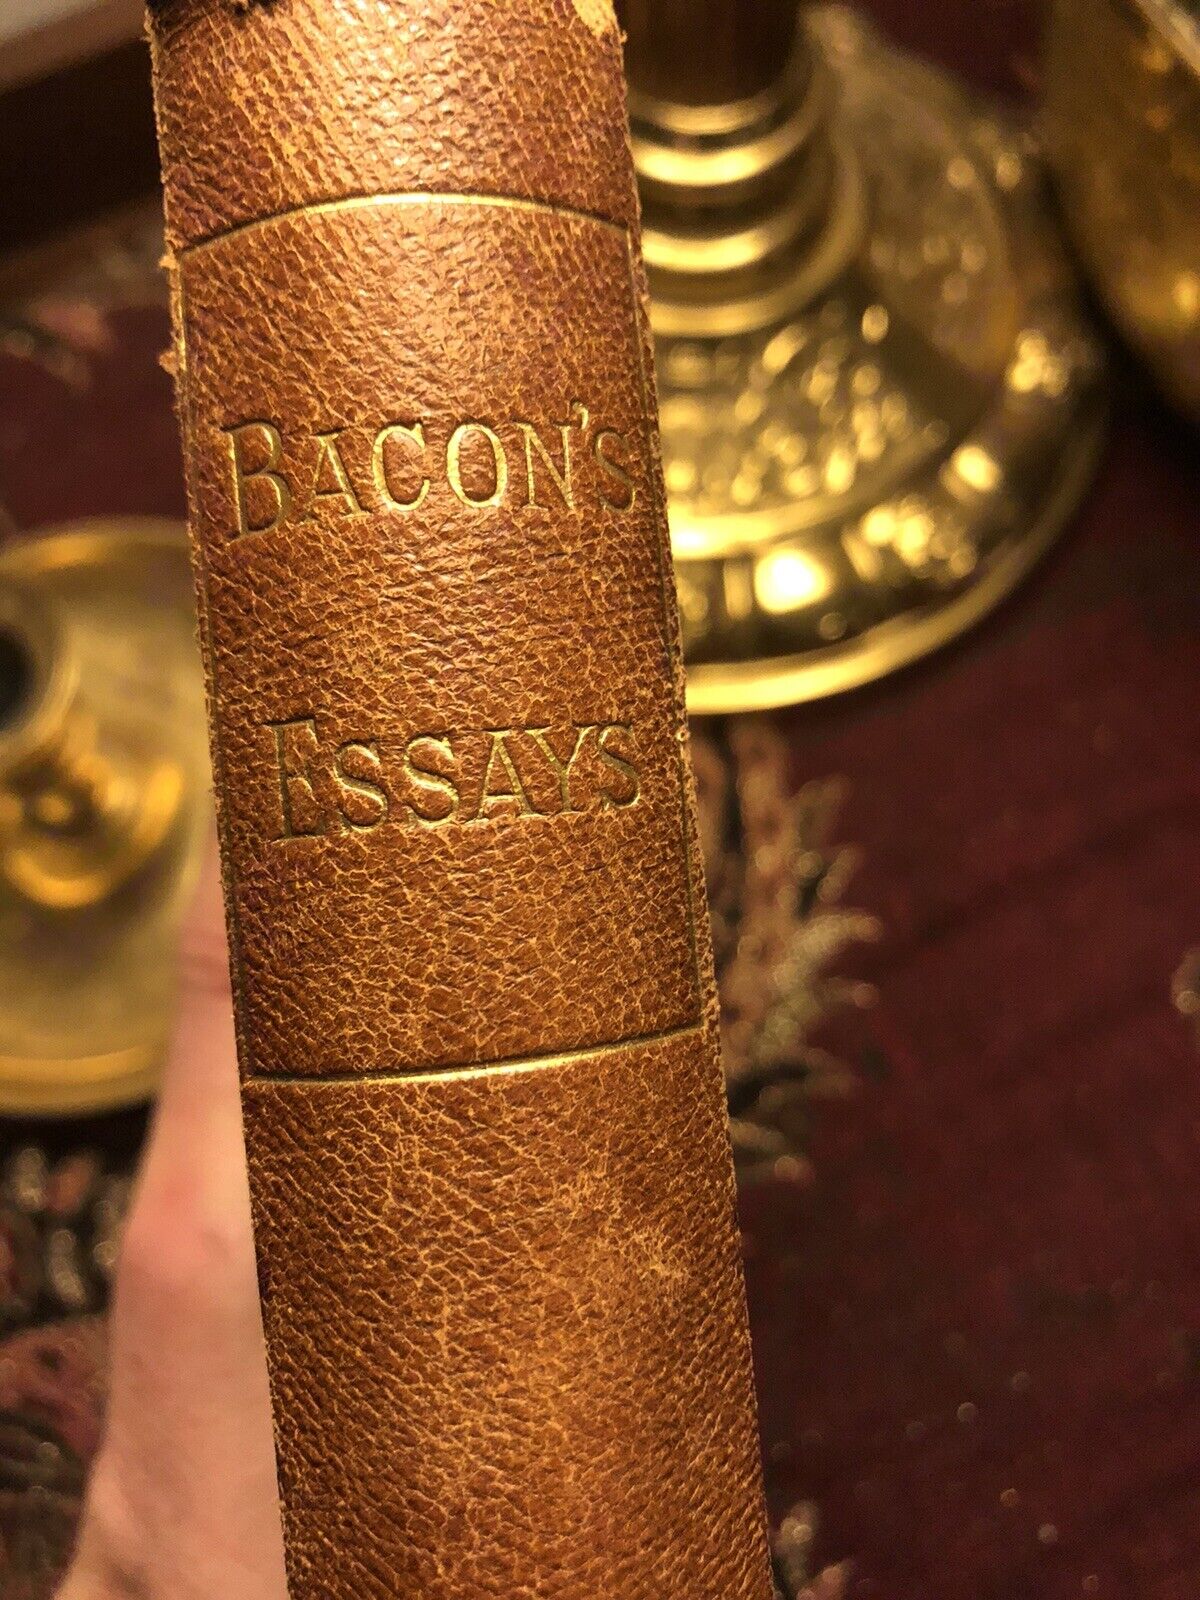 1885 FRANCIS BACON The Essays or Counsels Civil and Moral INTRO BY HENRY MORLEY